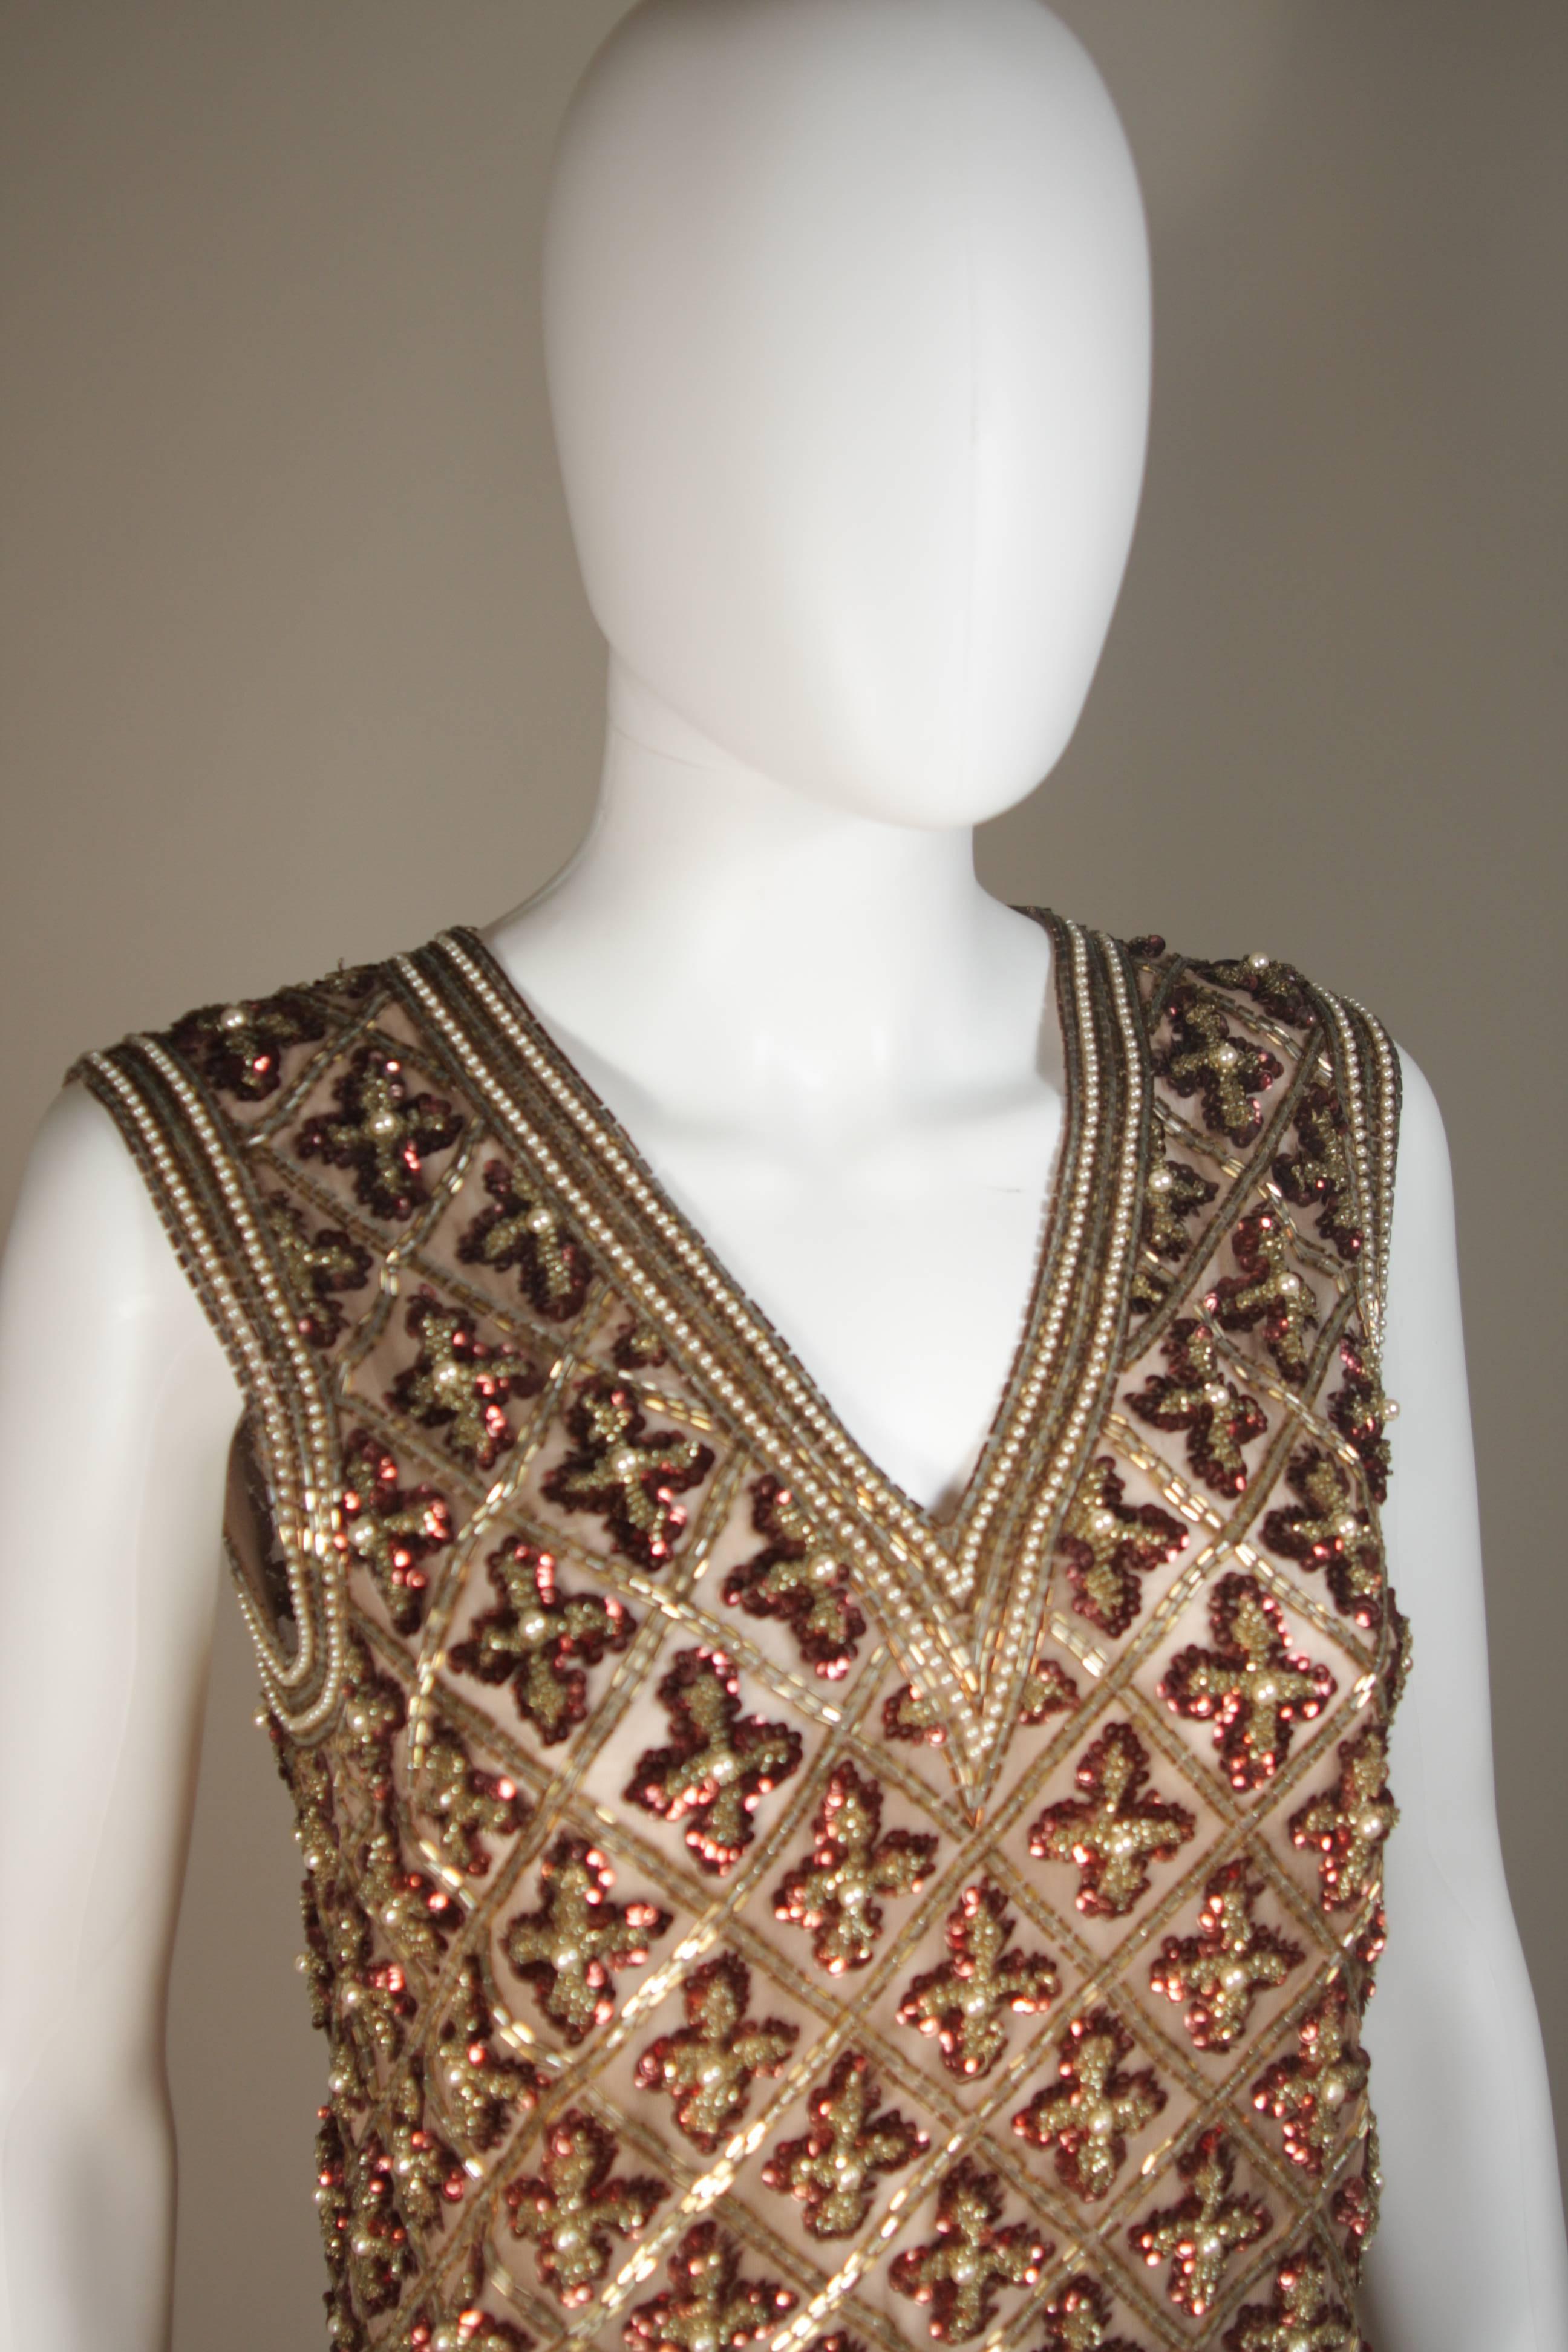 Attributed to GALANOS Gold and Burgundy Relief Beaded Blouse Size Small Medium In Excellent Condition For Sale In Los Angeles, CA